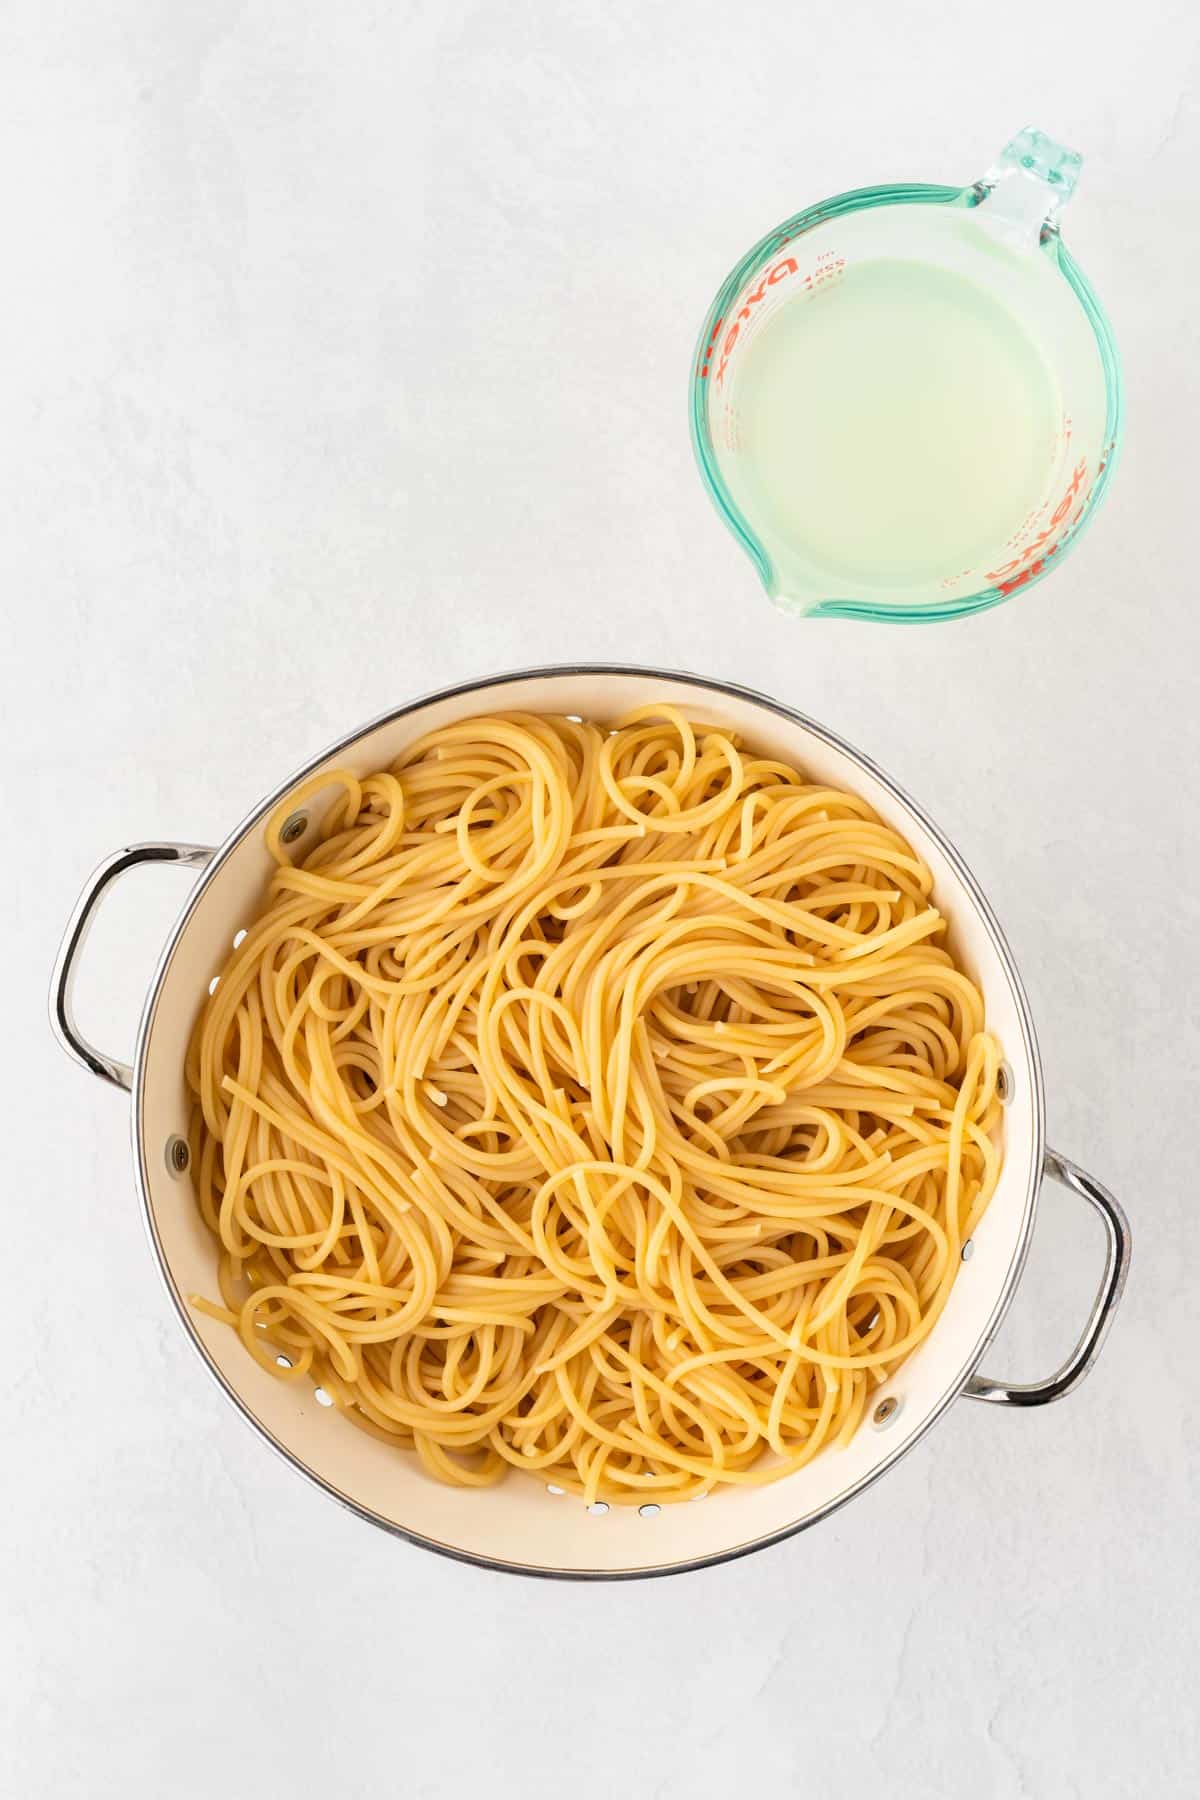 A photo of strained spaghetti noodles in a colander with a measuring glass of pasta water.